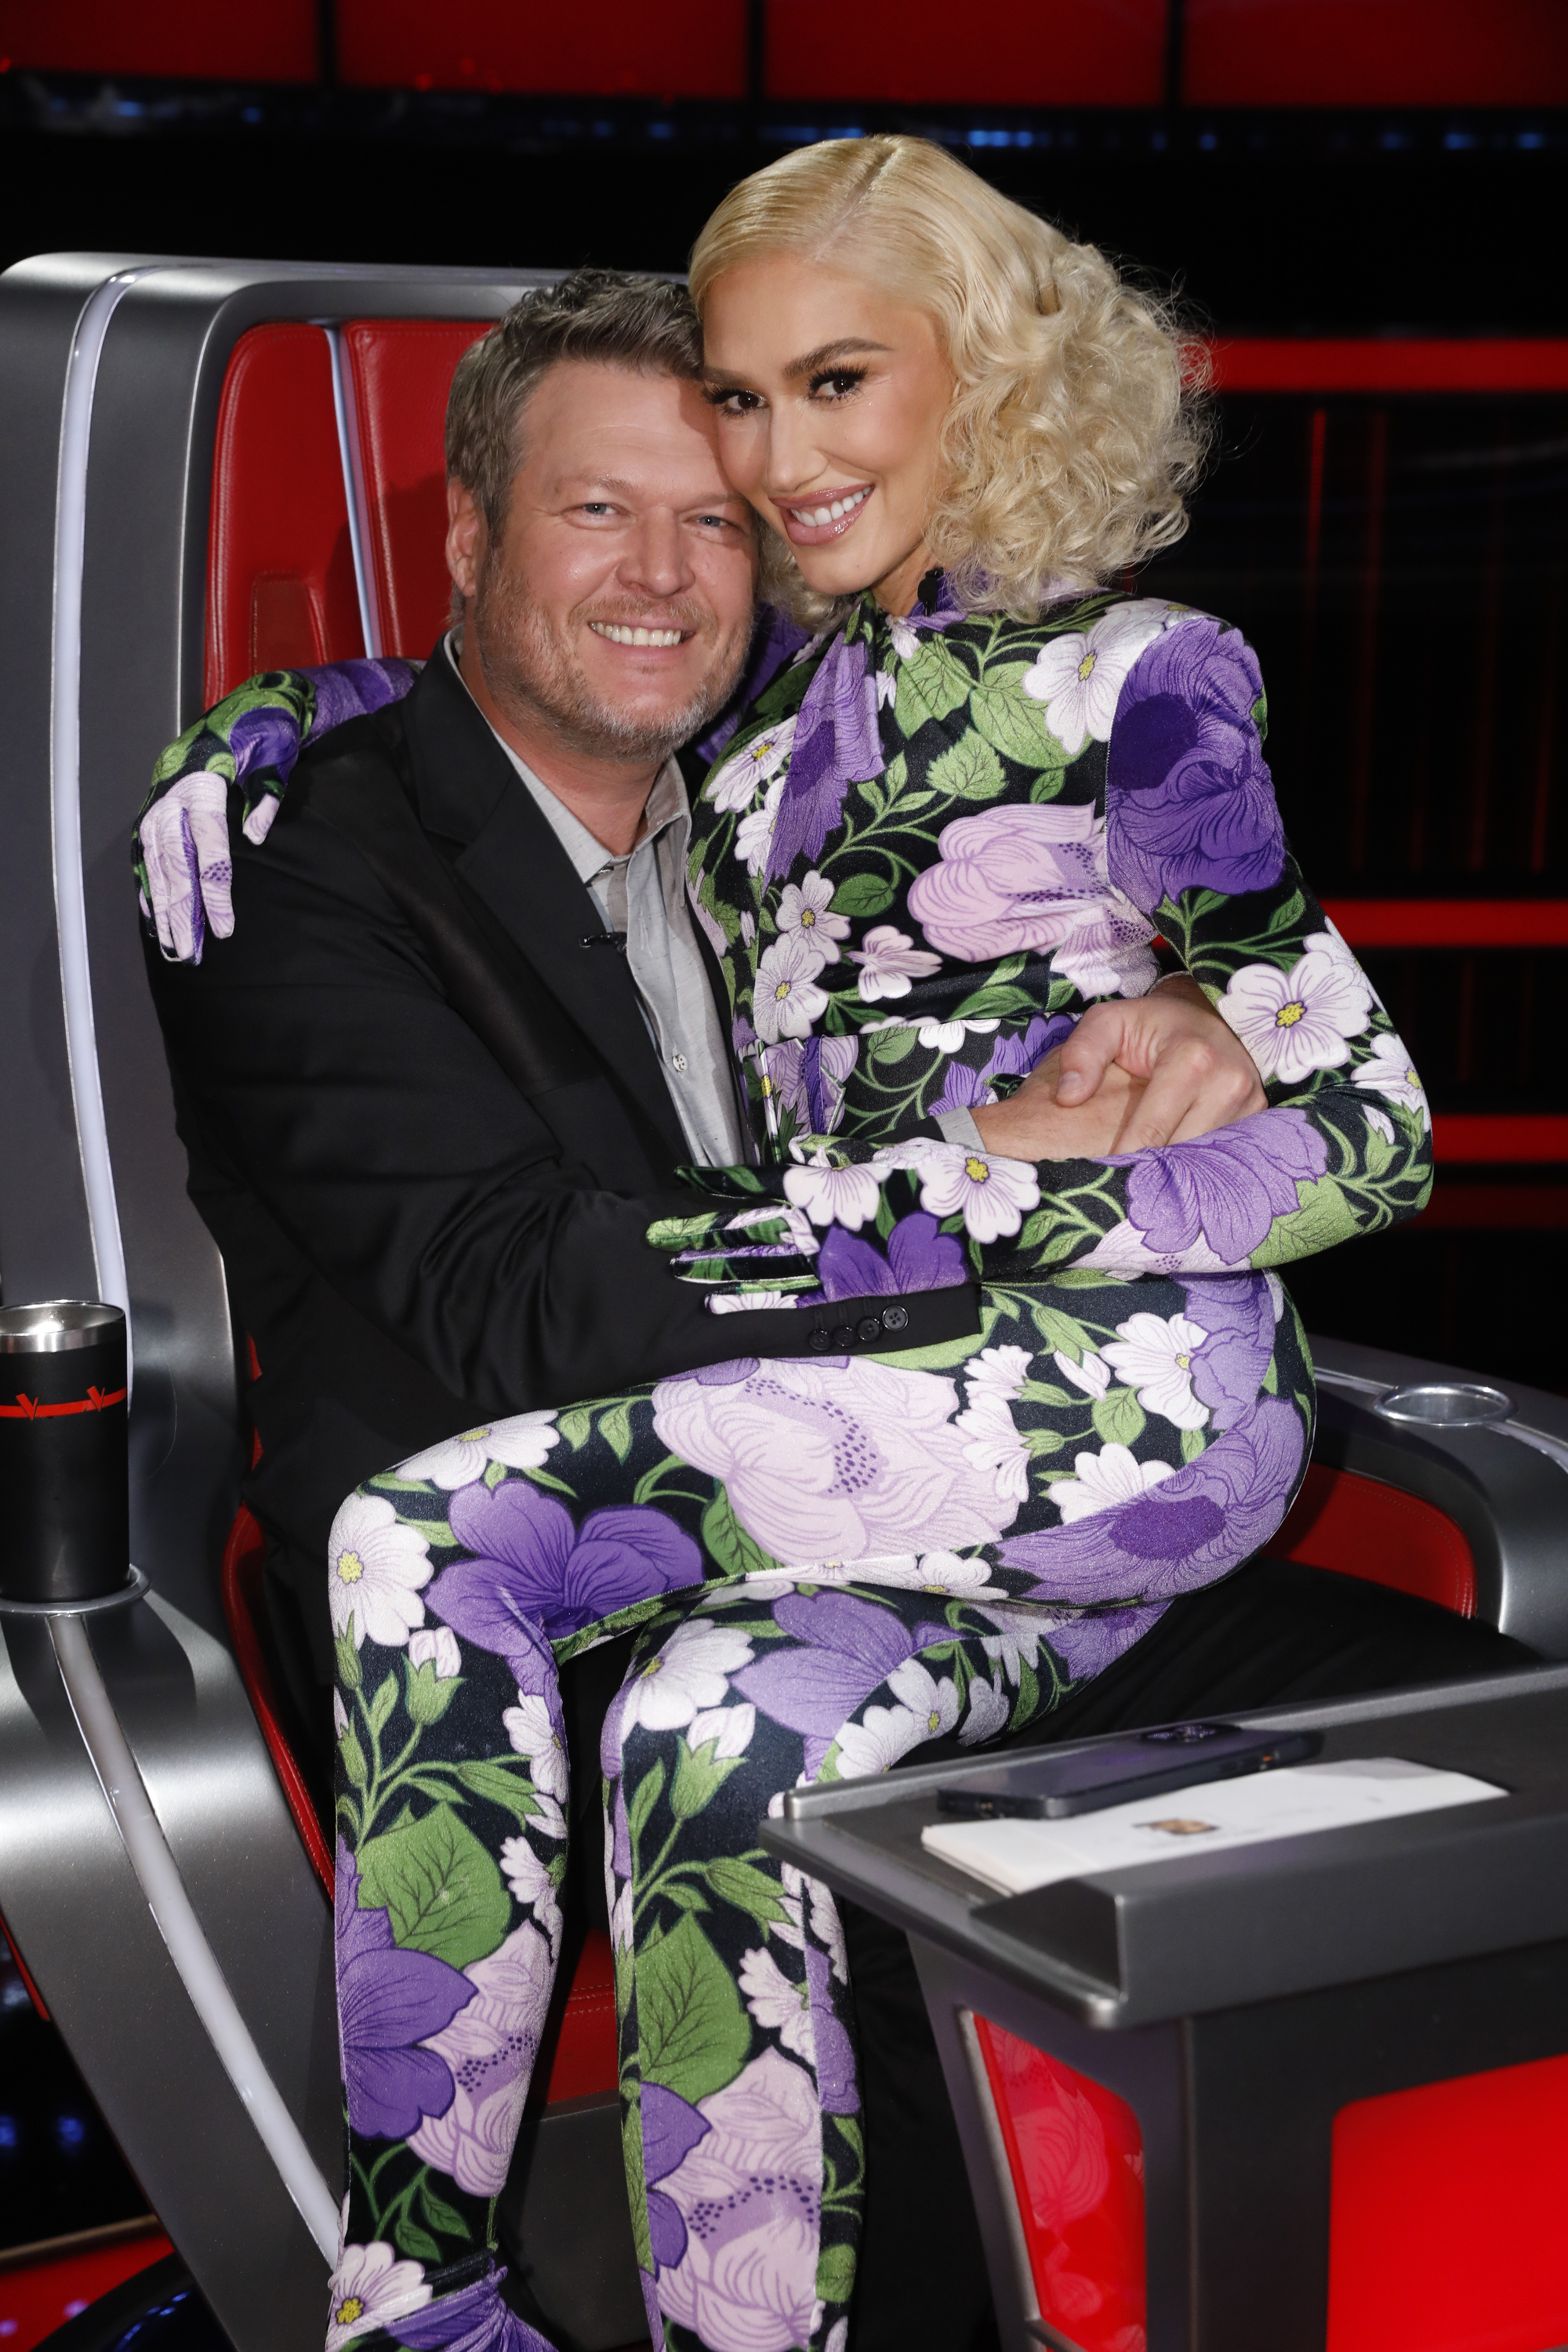 Gwen and Blake met on The Voice and she's now under fire from fans